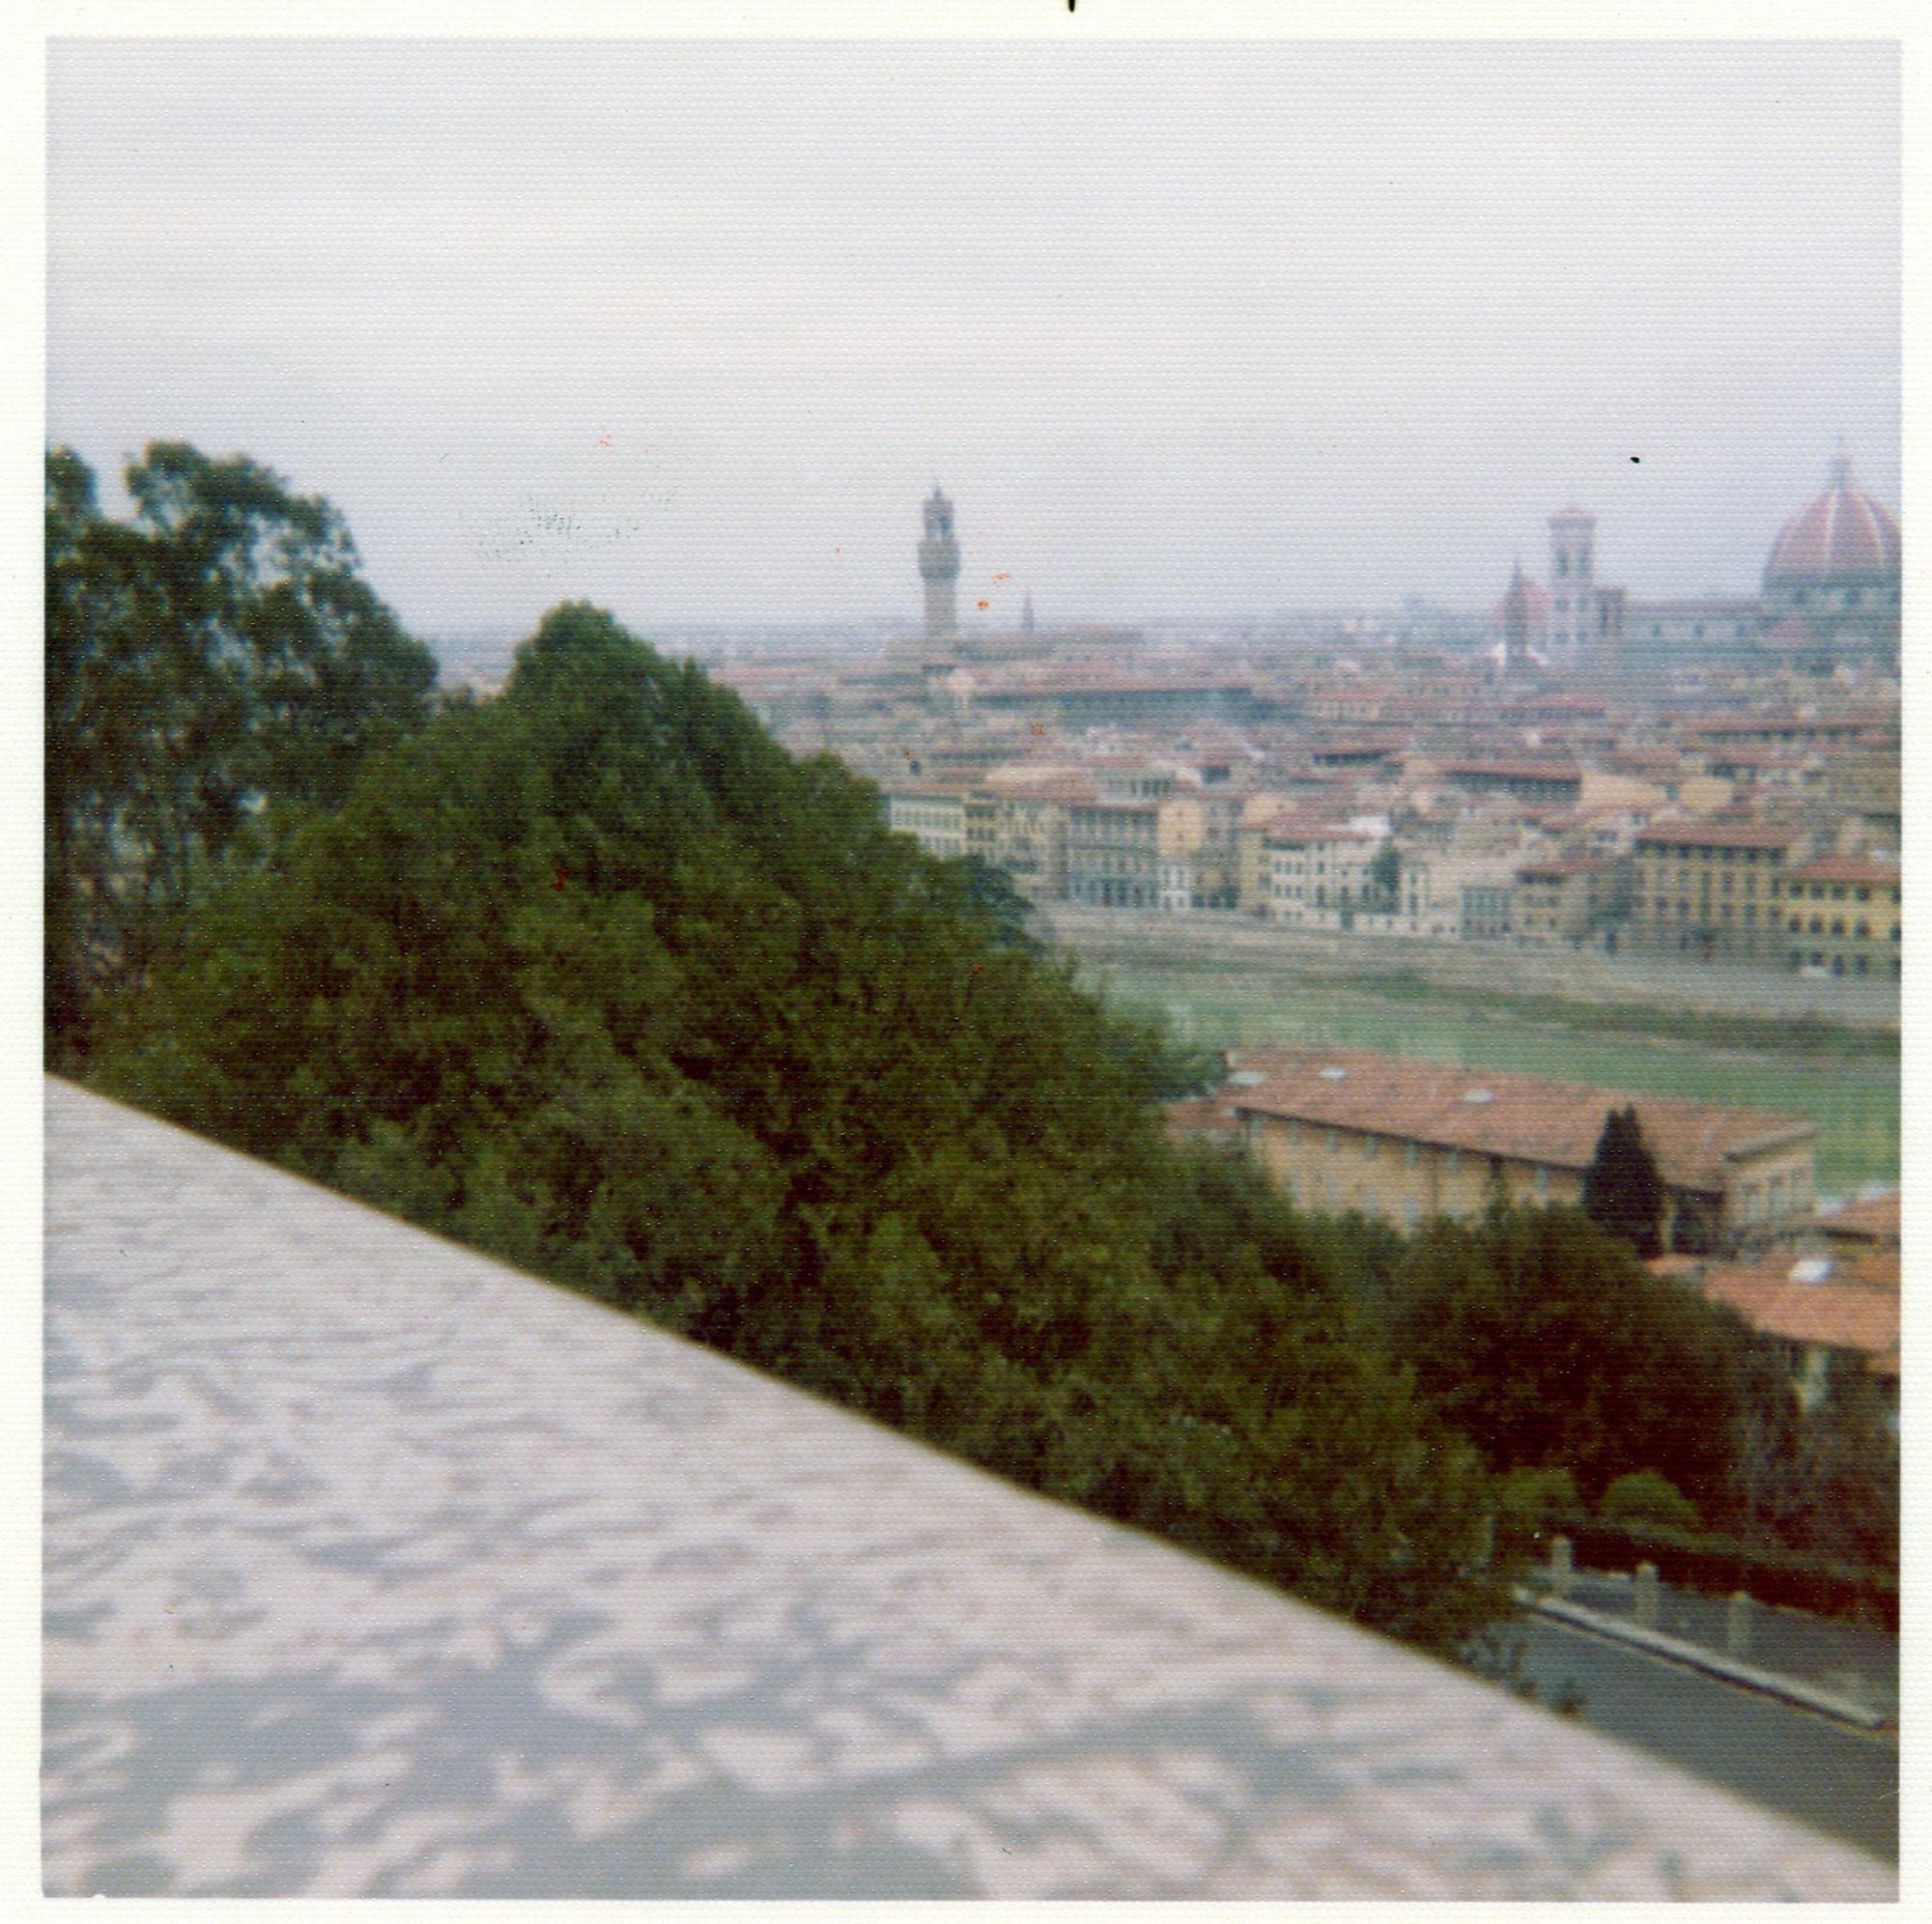 Italy (126 Film) - Florence #15